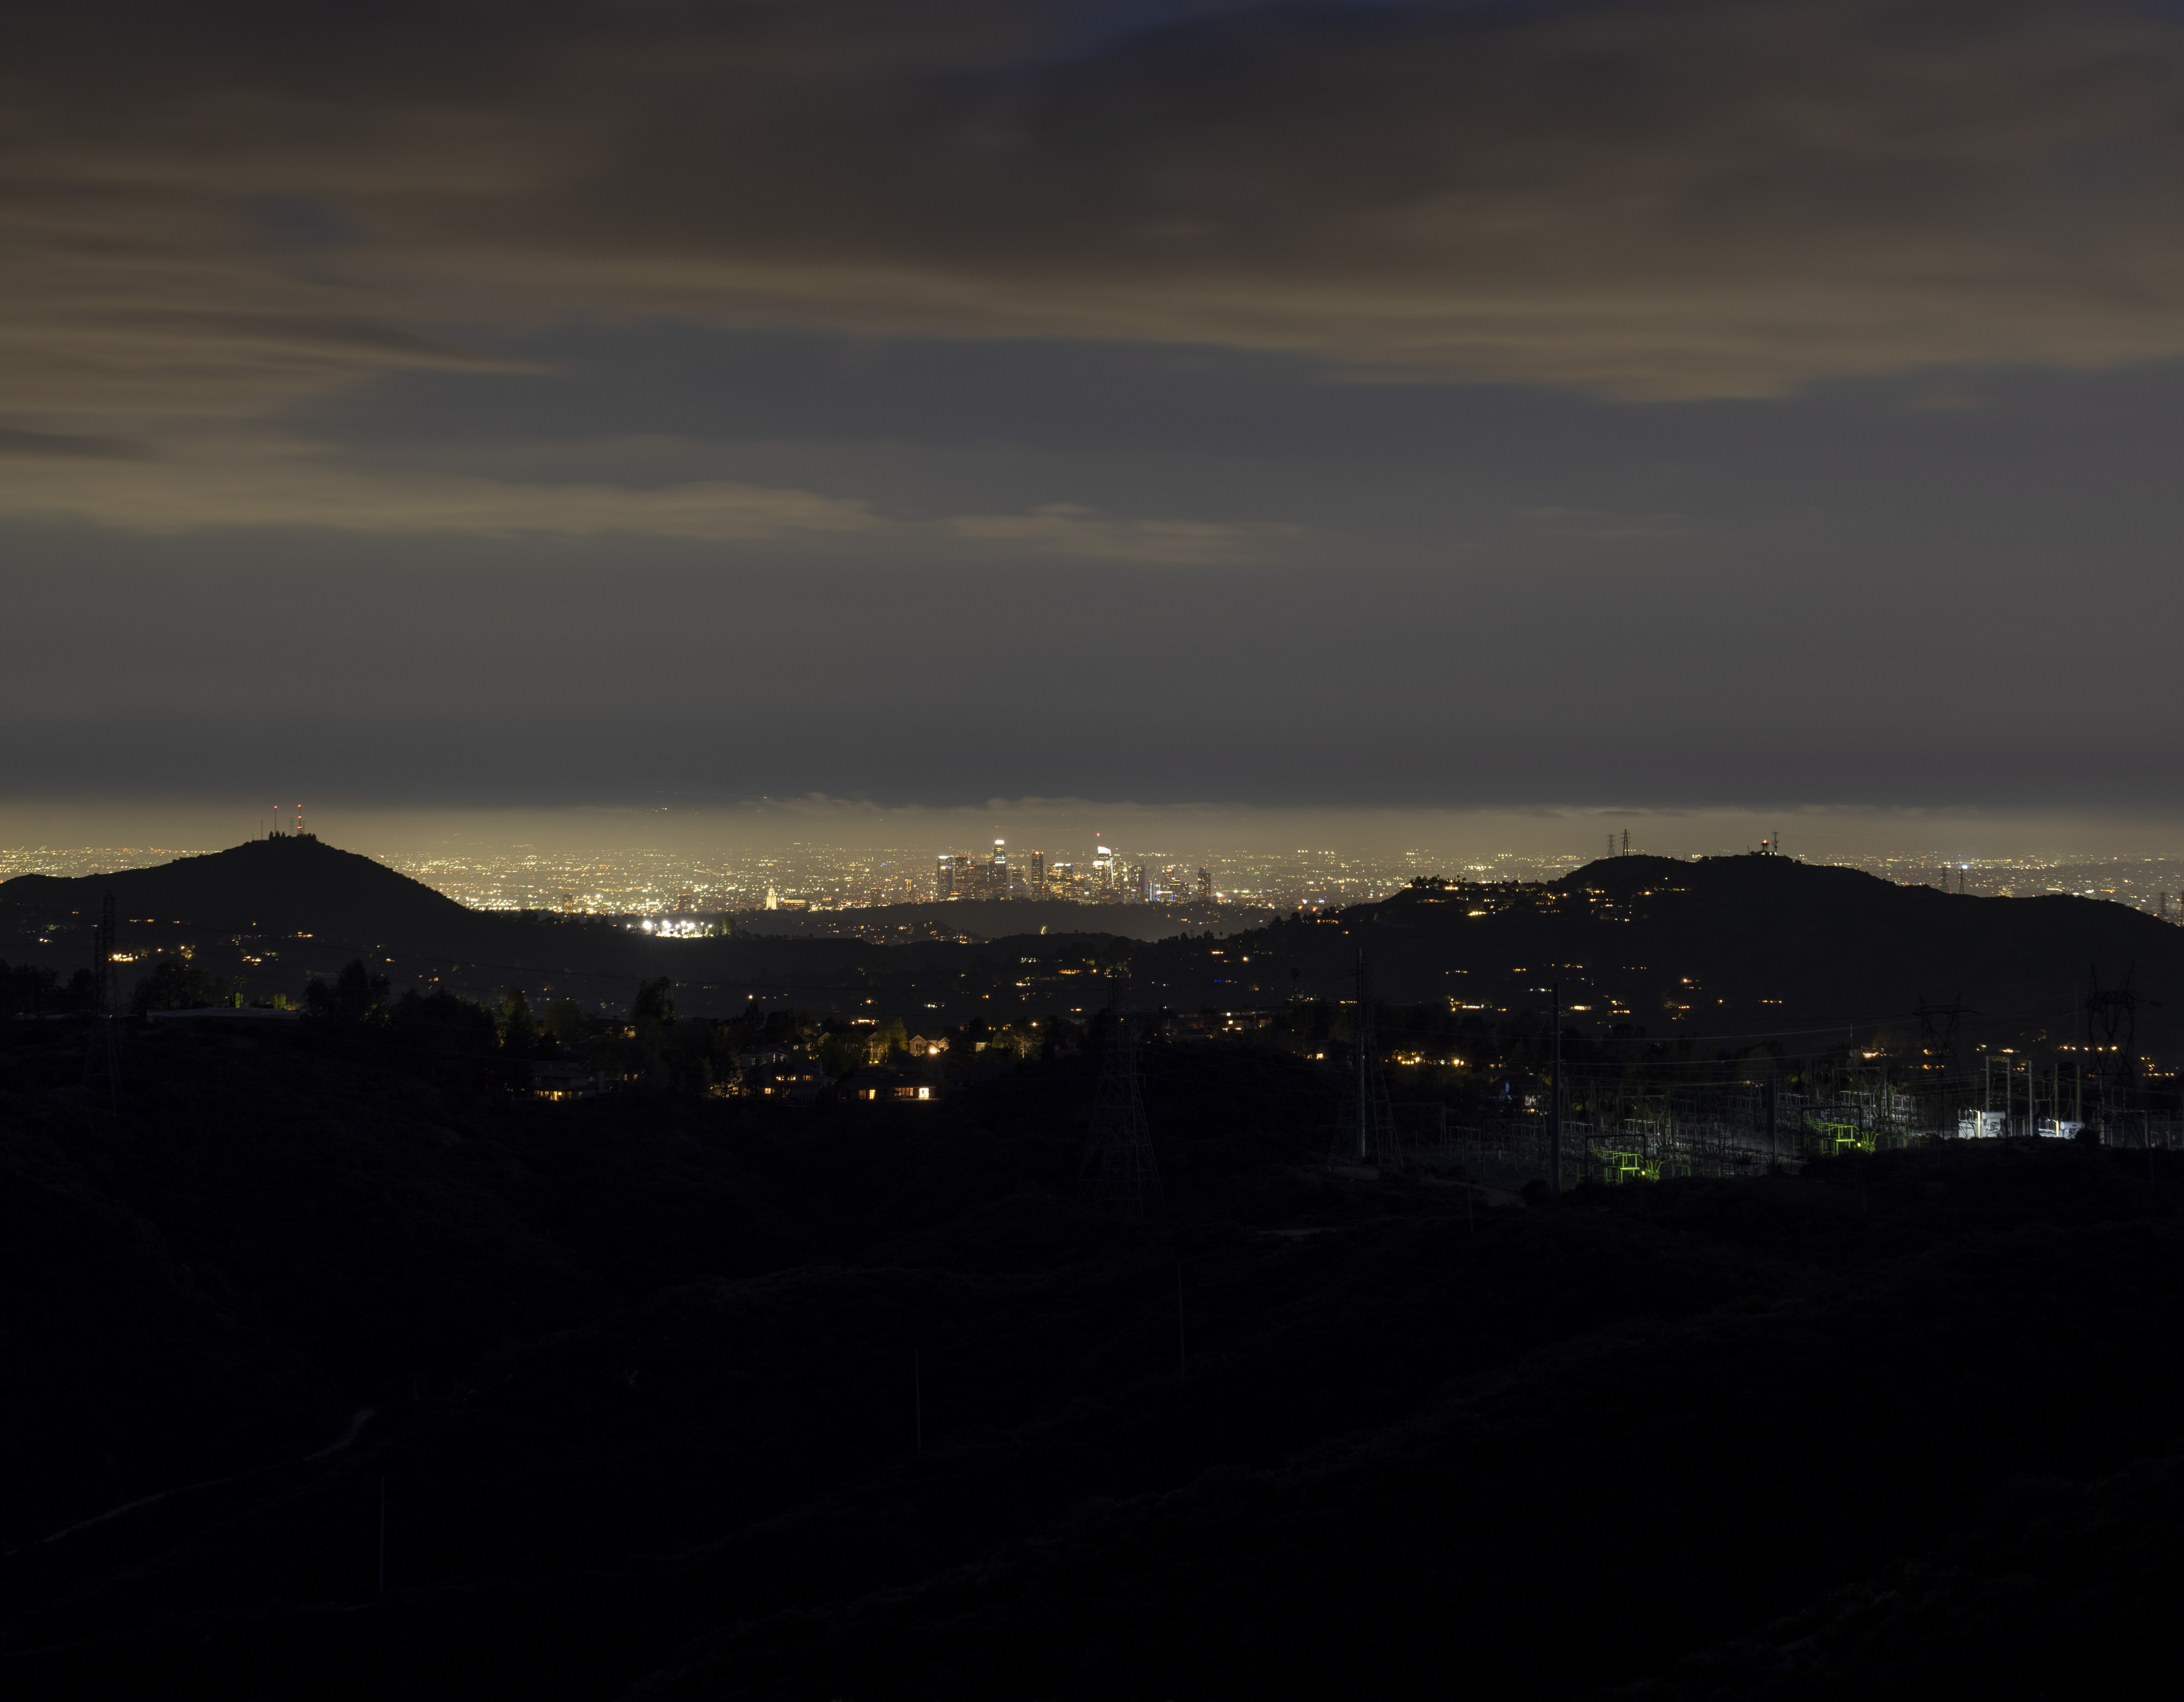 Los Angeles from the Angeles Crest II, La Canada